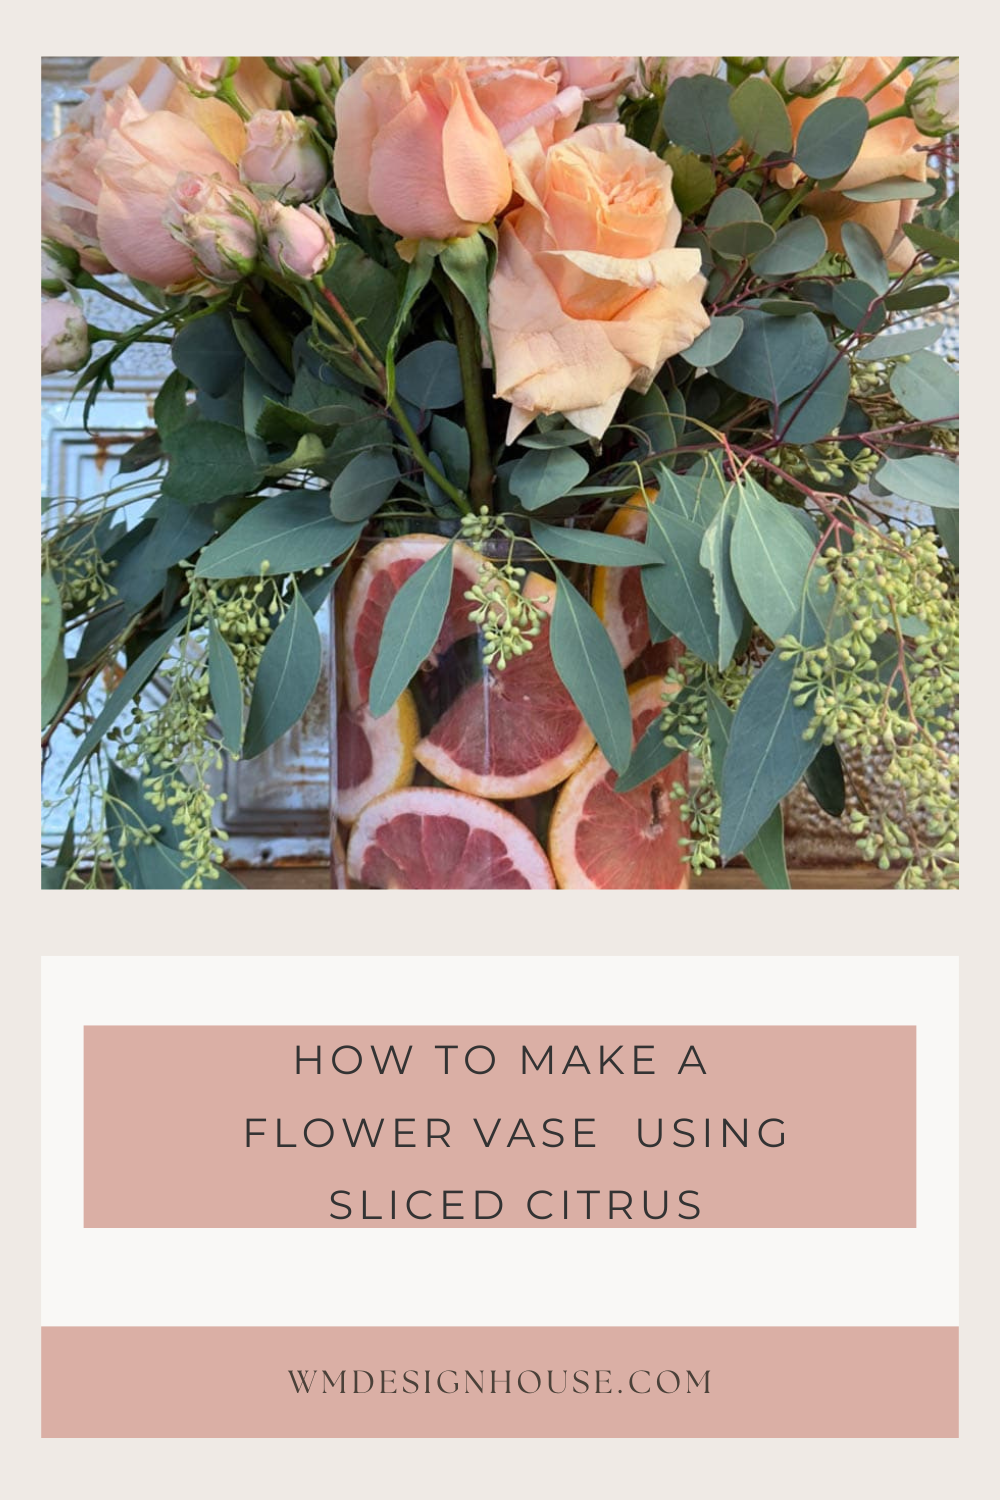 How to make a Creative Flower Vase using Sliced Citrus